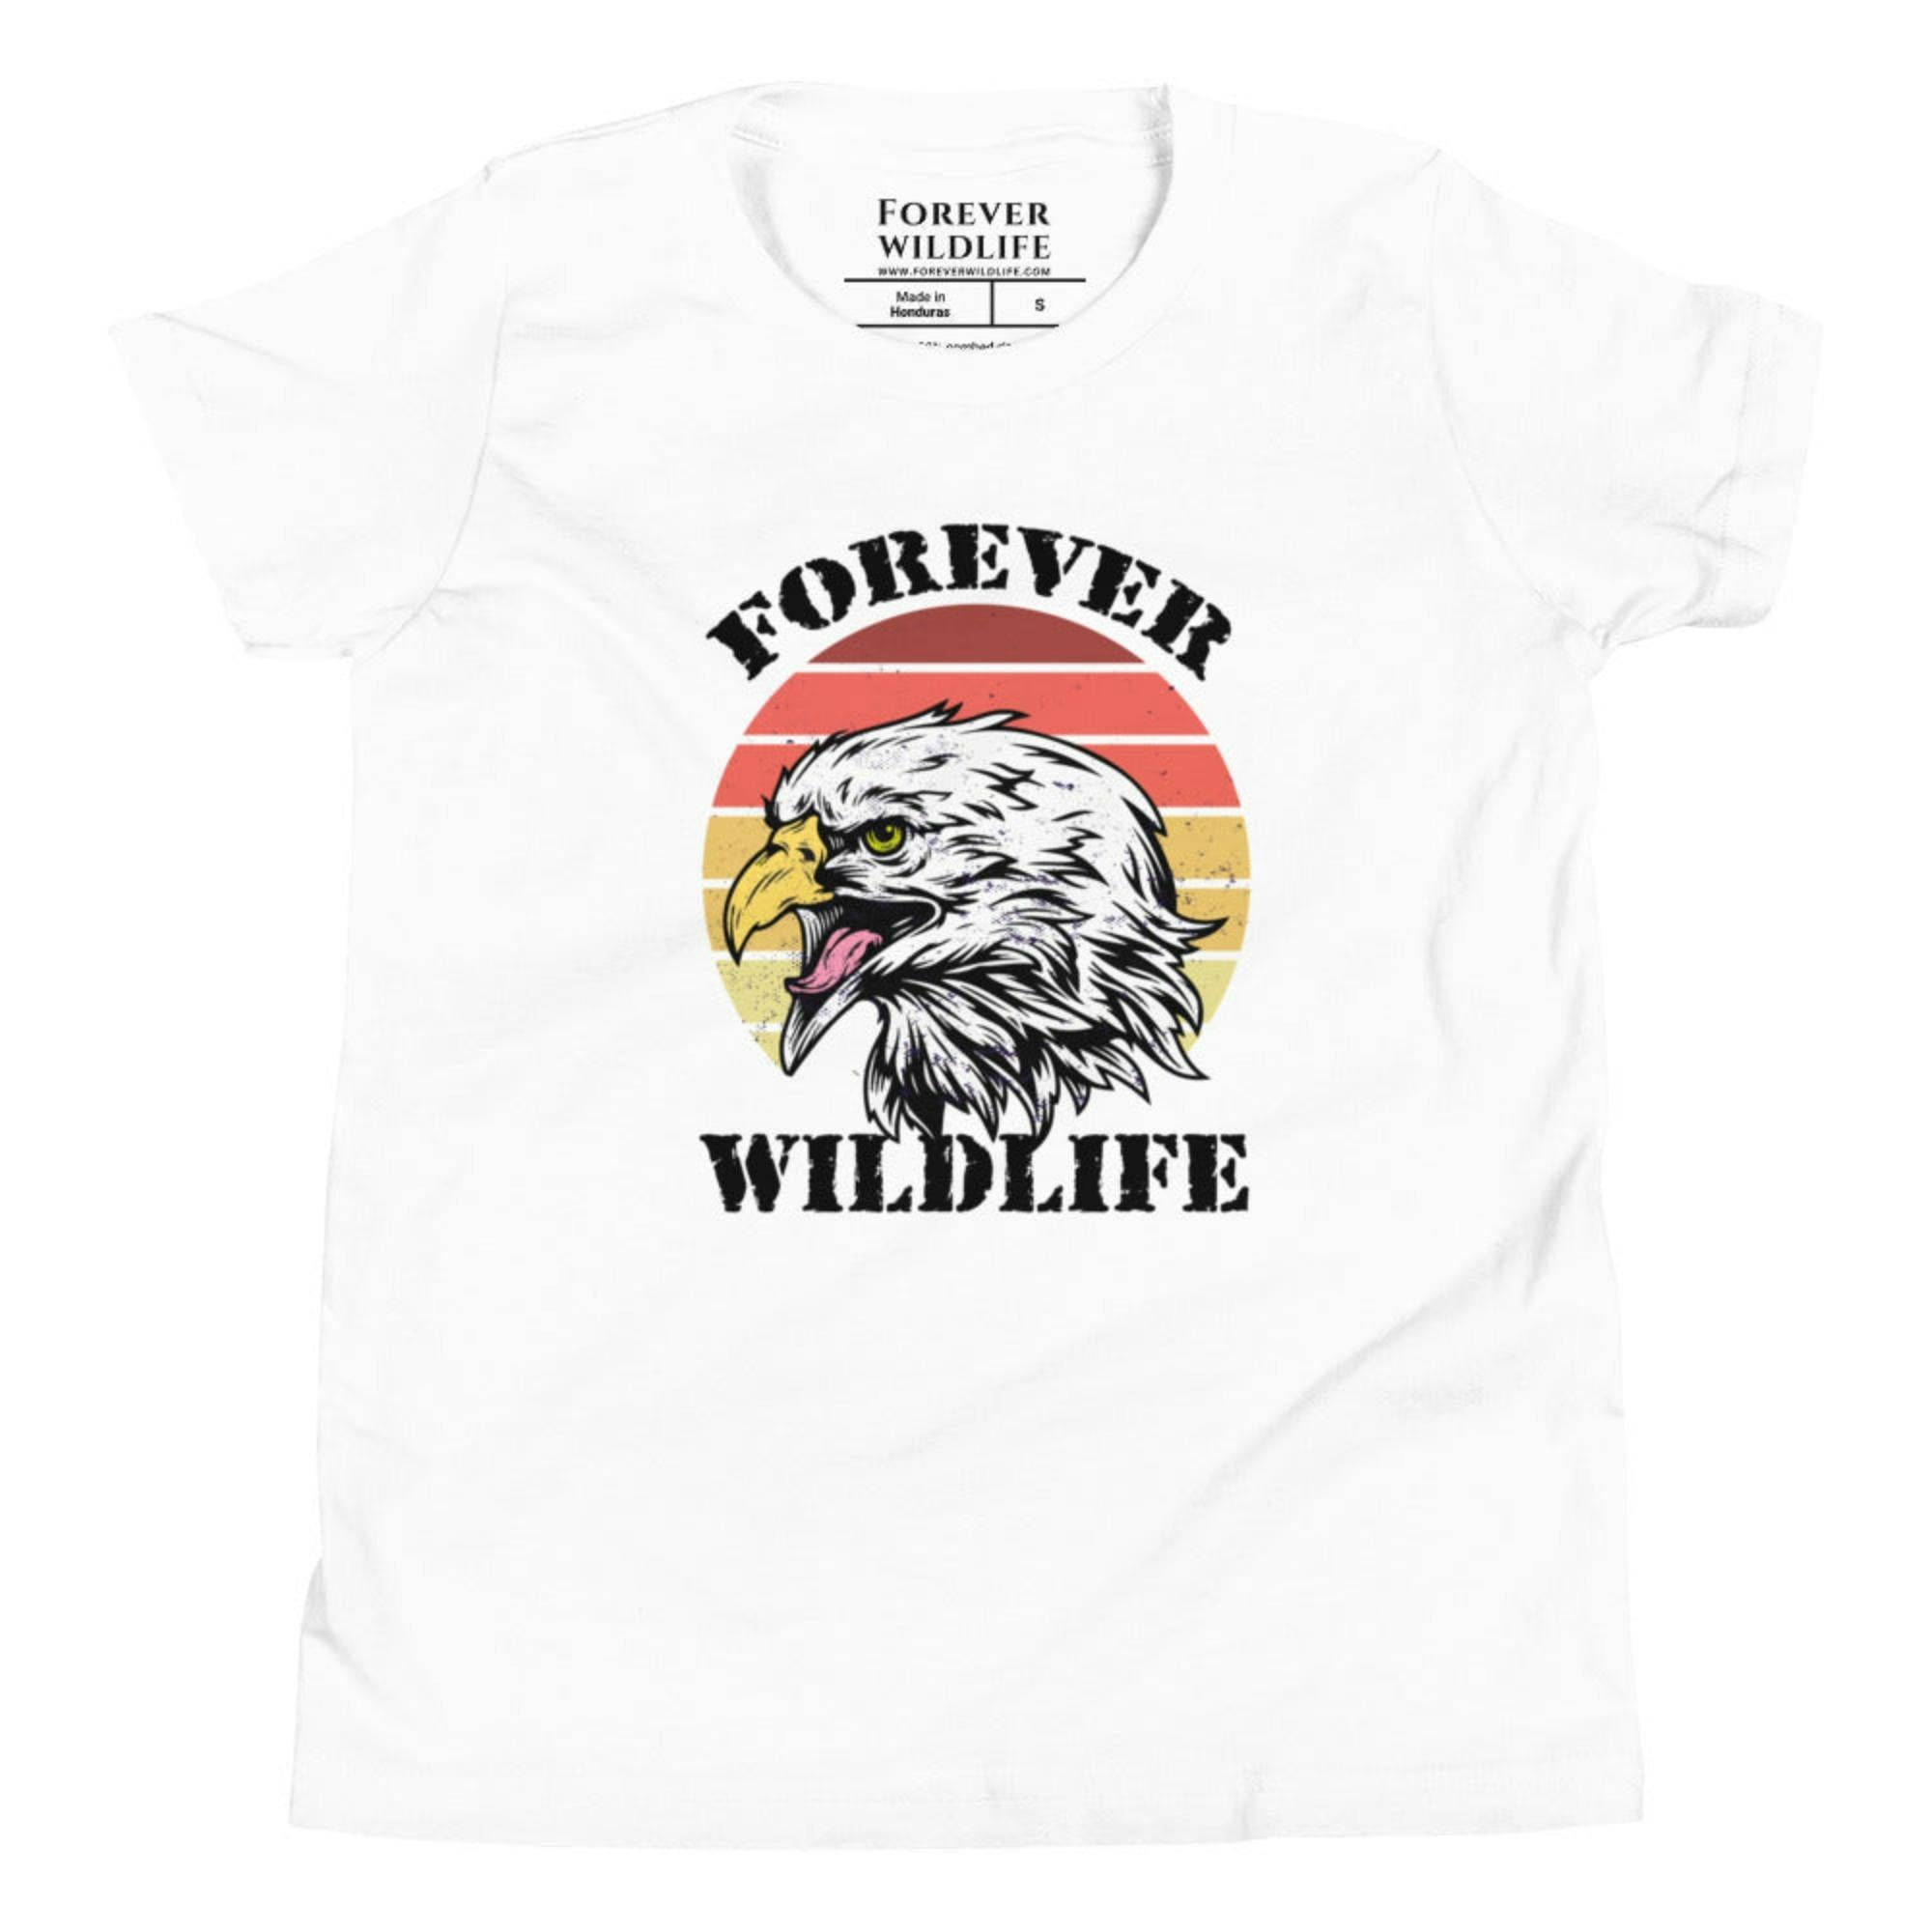 White Youth T-Shirt with Eagle graphic as part of Wildlife T Shirts, Wildlife Clothing & Apparel by Forever Wildlife